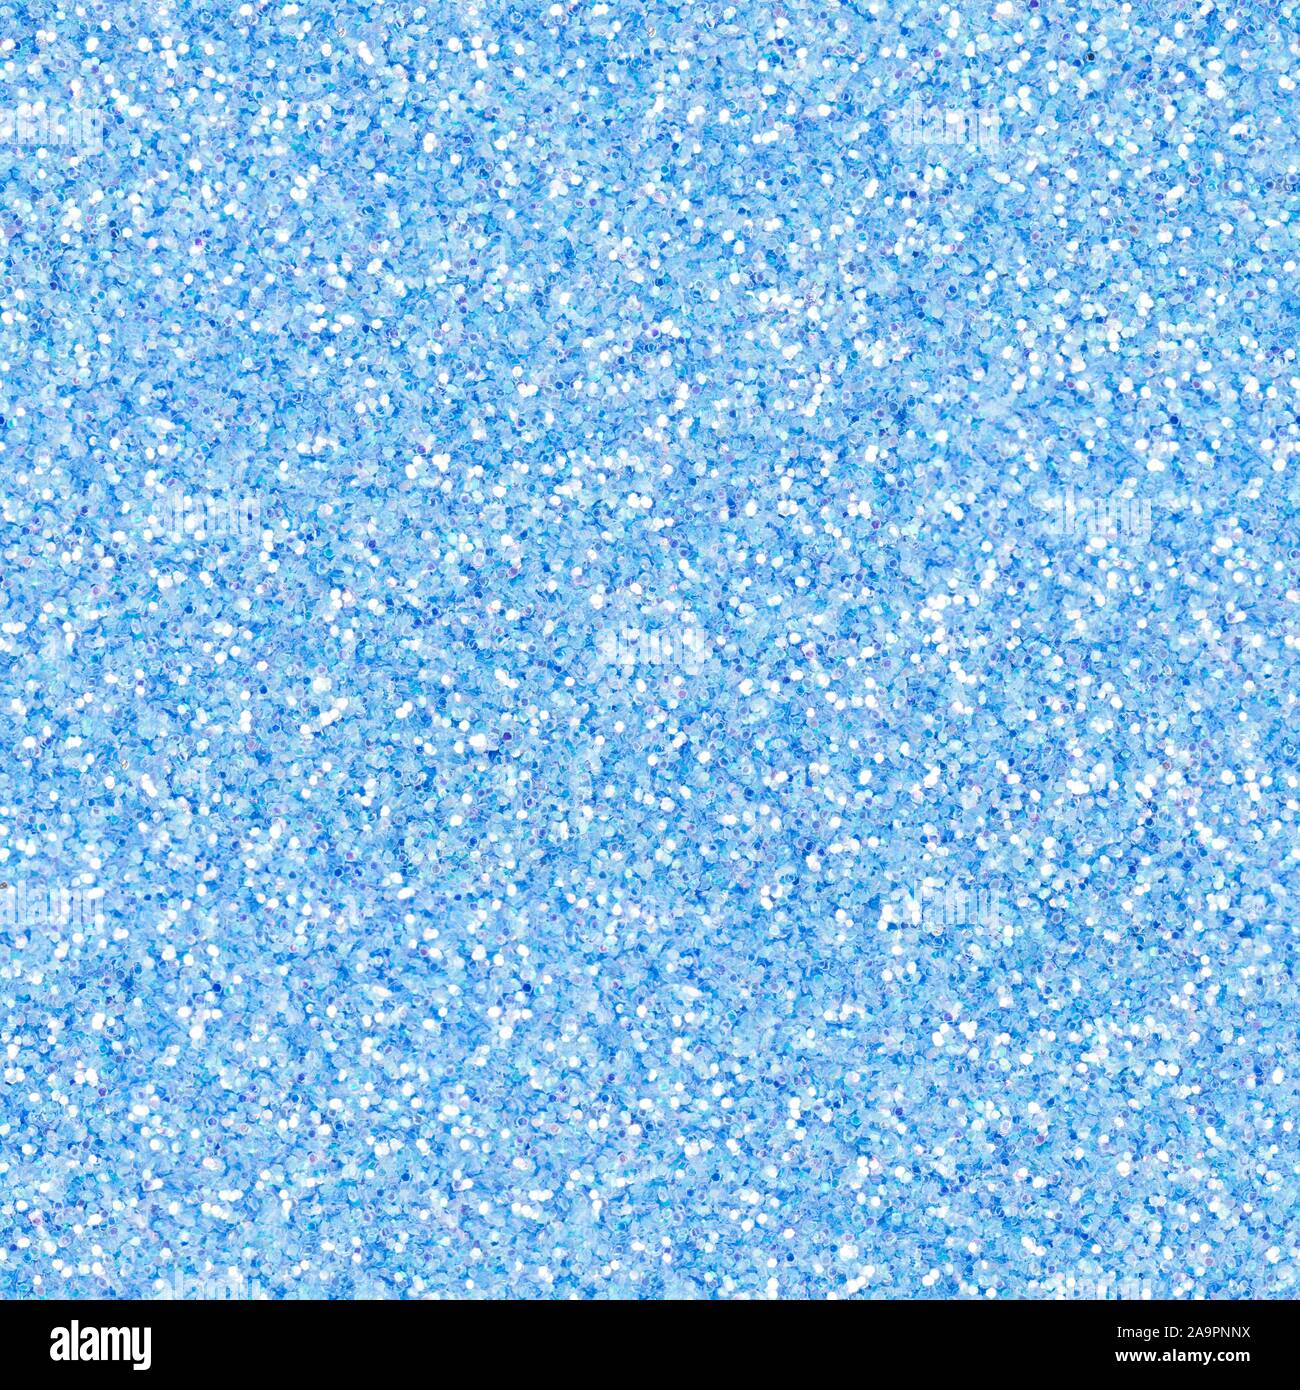 Bright light blue glitter, sparkle confetti texture. Christmas abstract background, seamless pattern Stock Photo